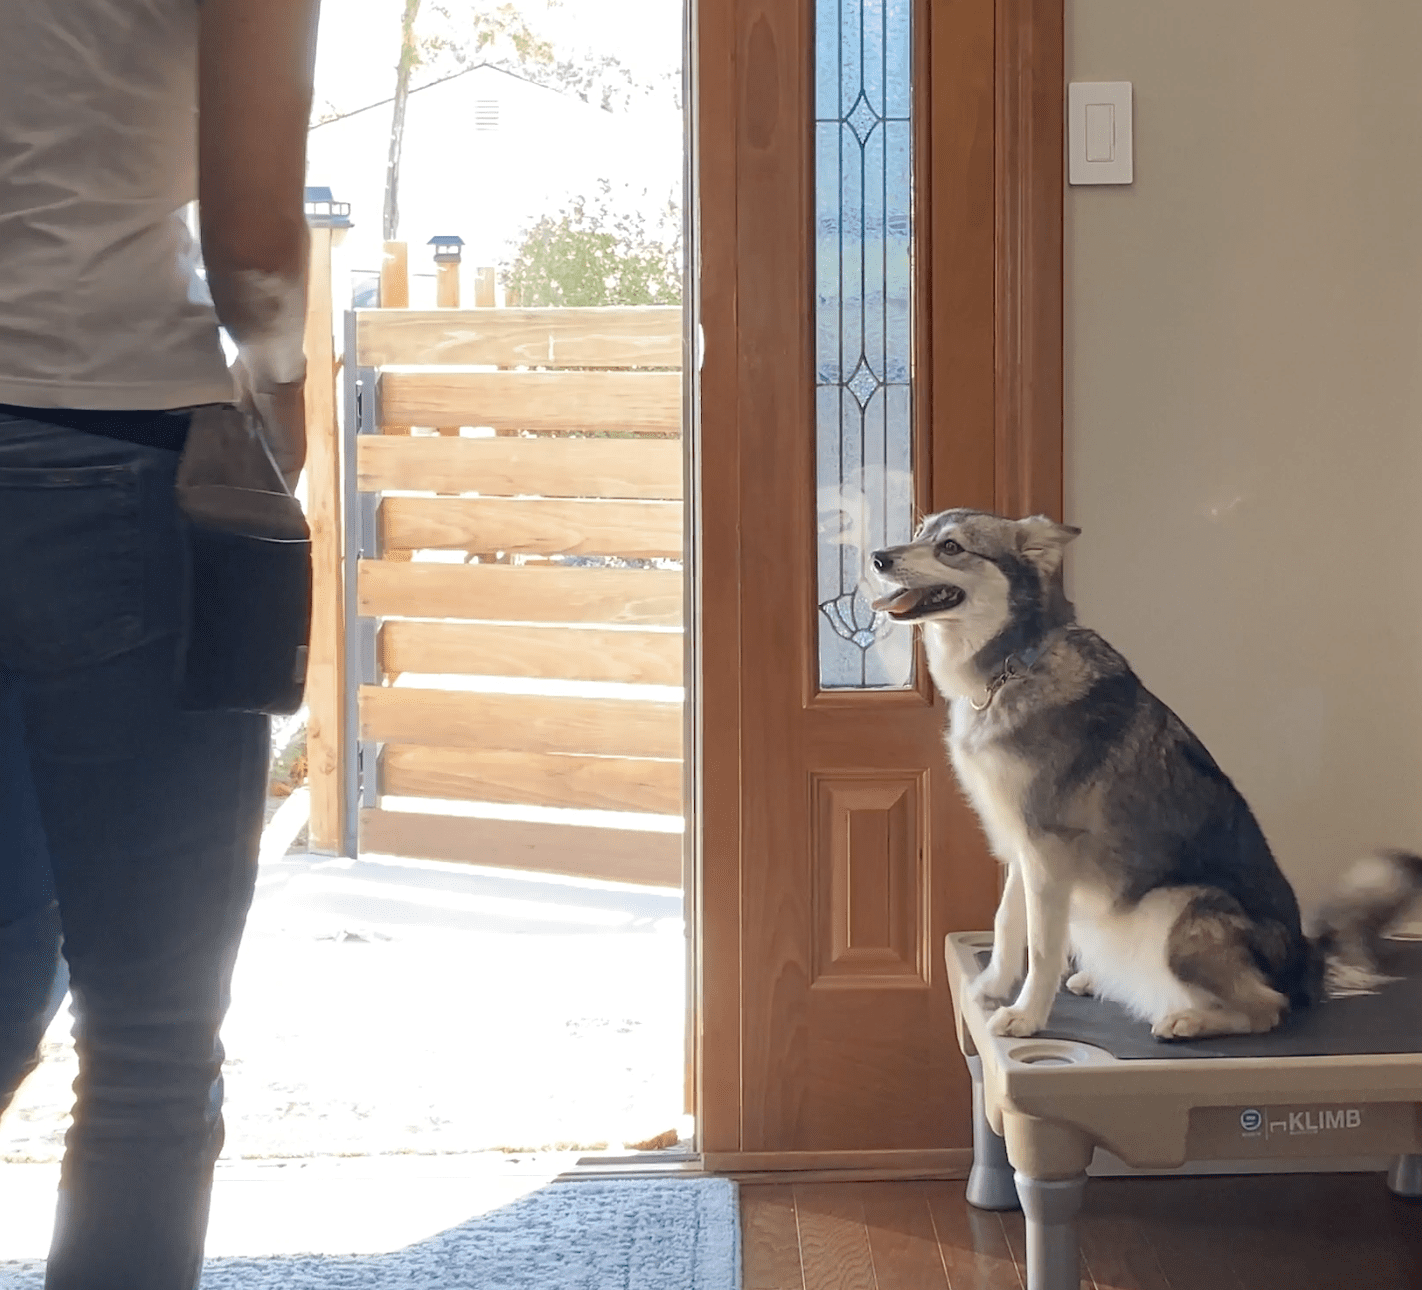 How to stop your dog from running out the door